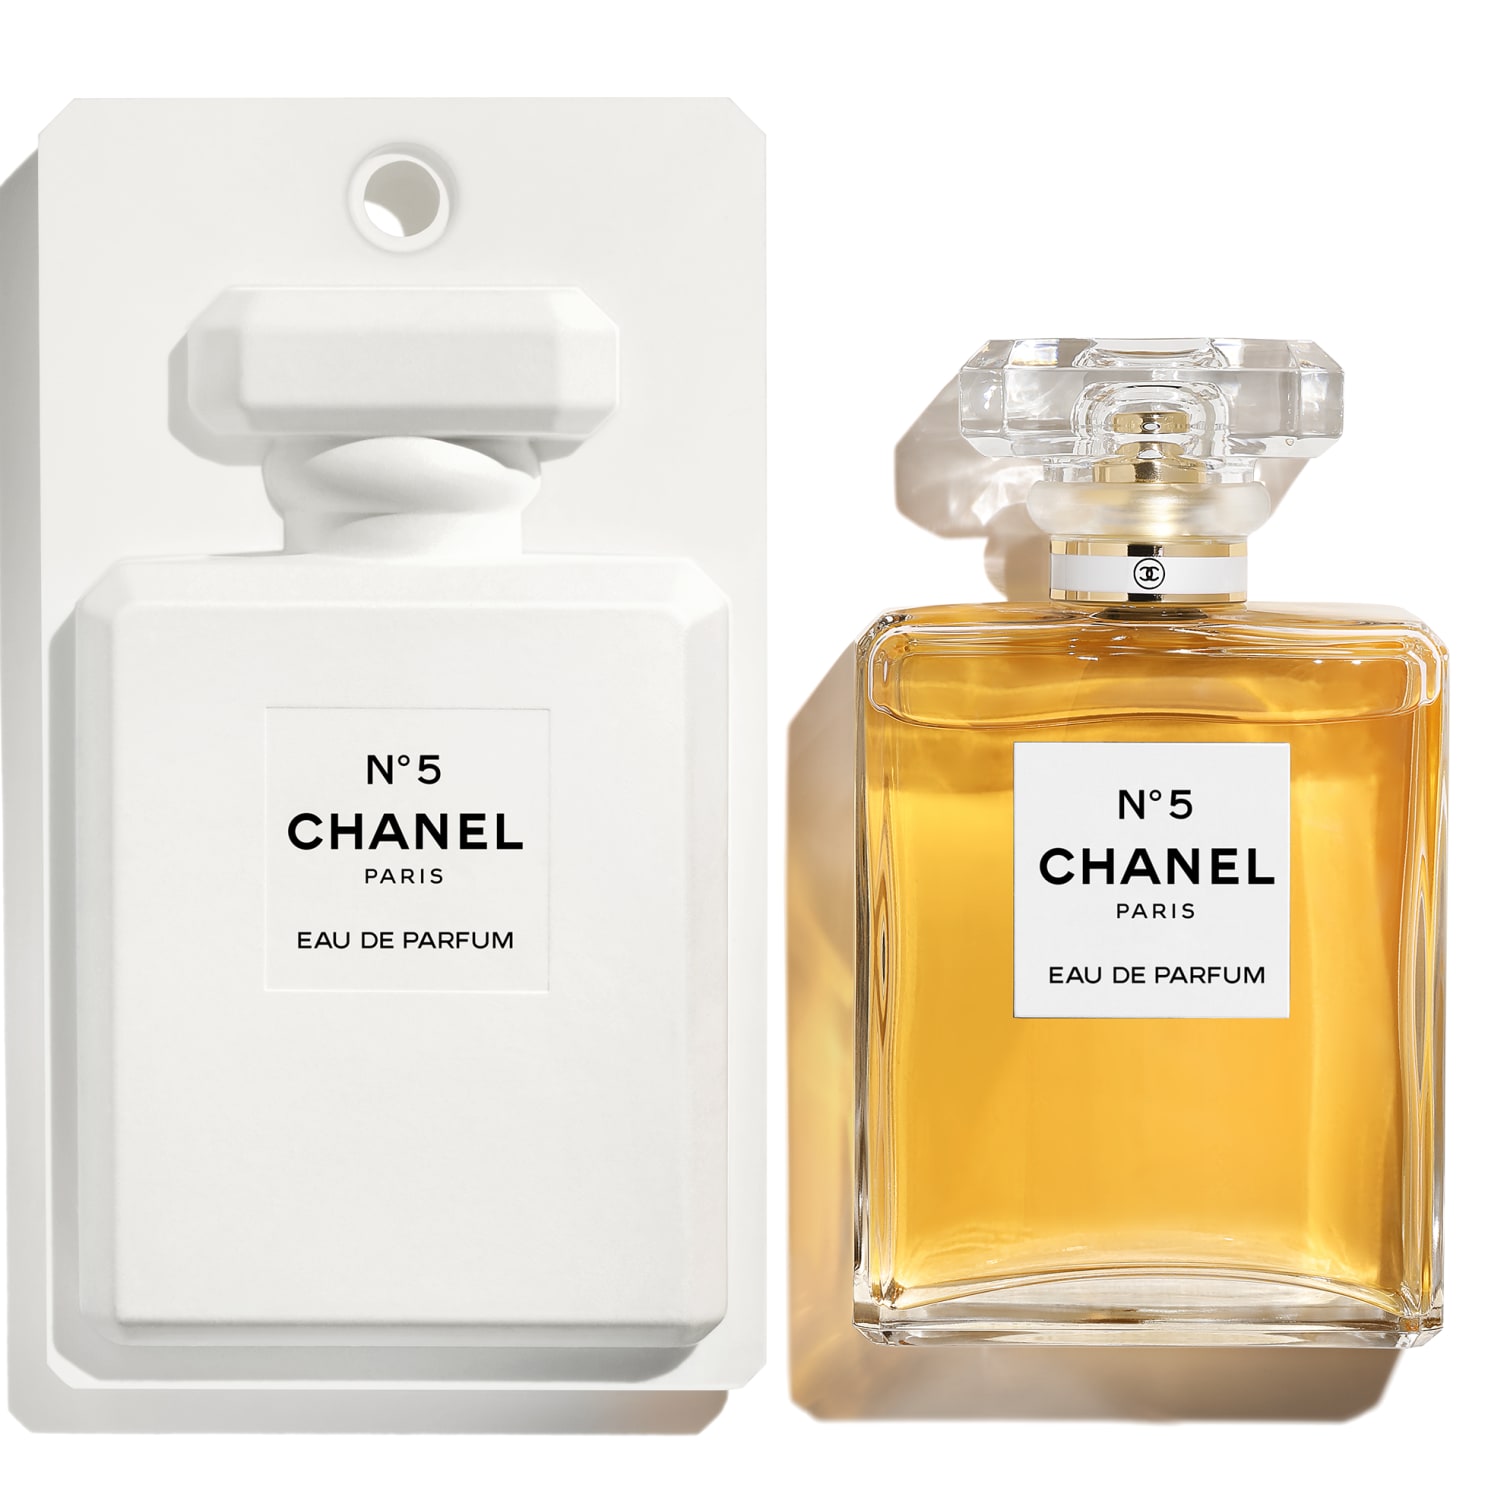 N°5 Limited-Edition Eau de Parfum Spray by CHANEL at ORCHARD MILE